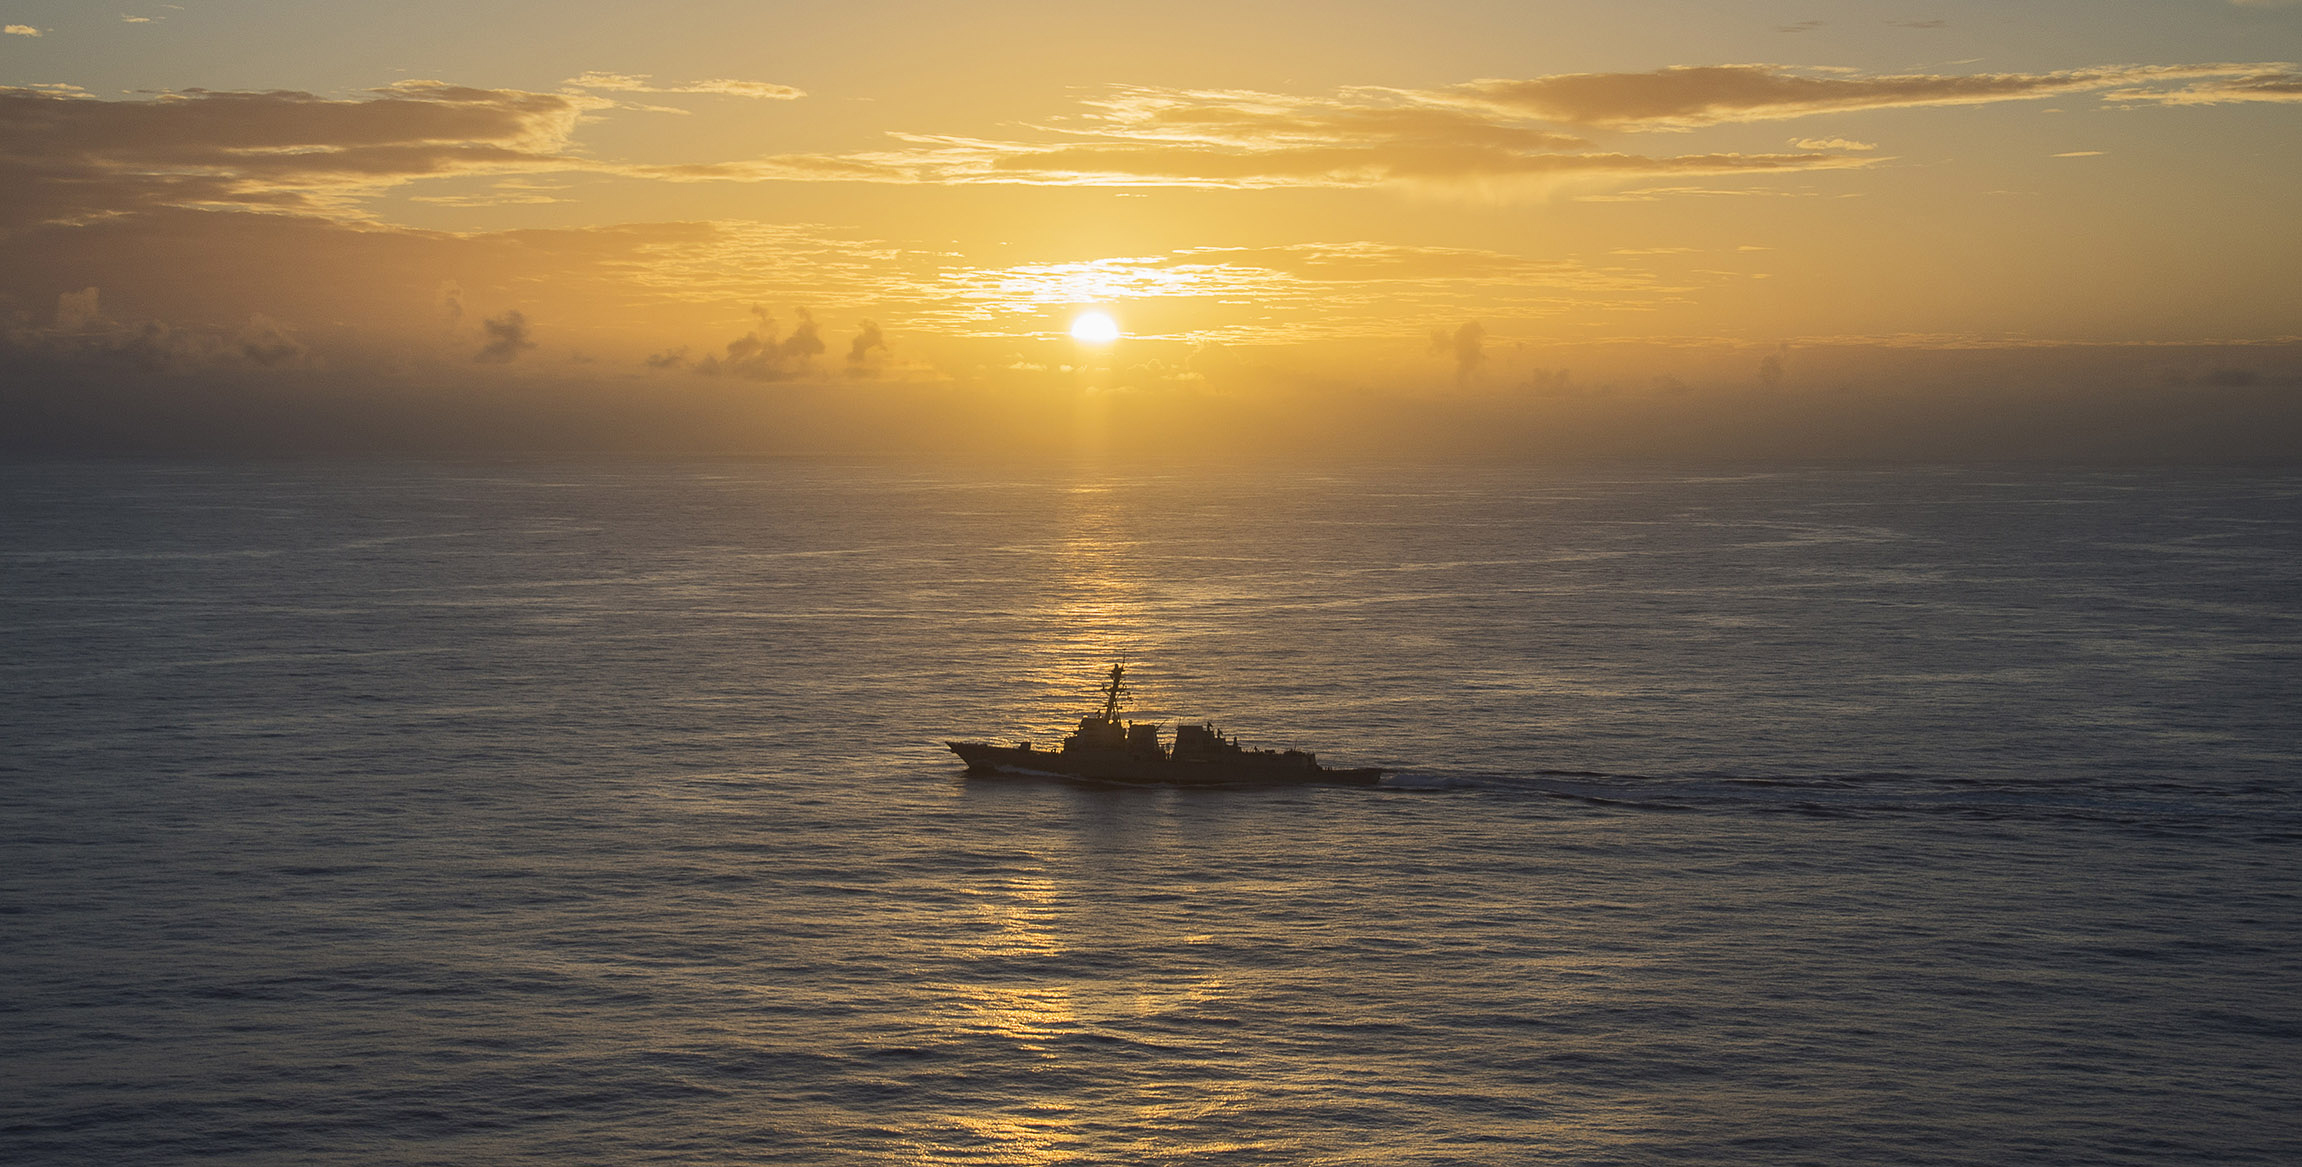 Arleigh Burke-class guided-missile destroyer USS Michael Murphy (DDG-112) transits the Philippine Sea on March 18, 2015. US Navy Photo